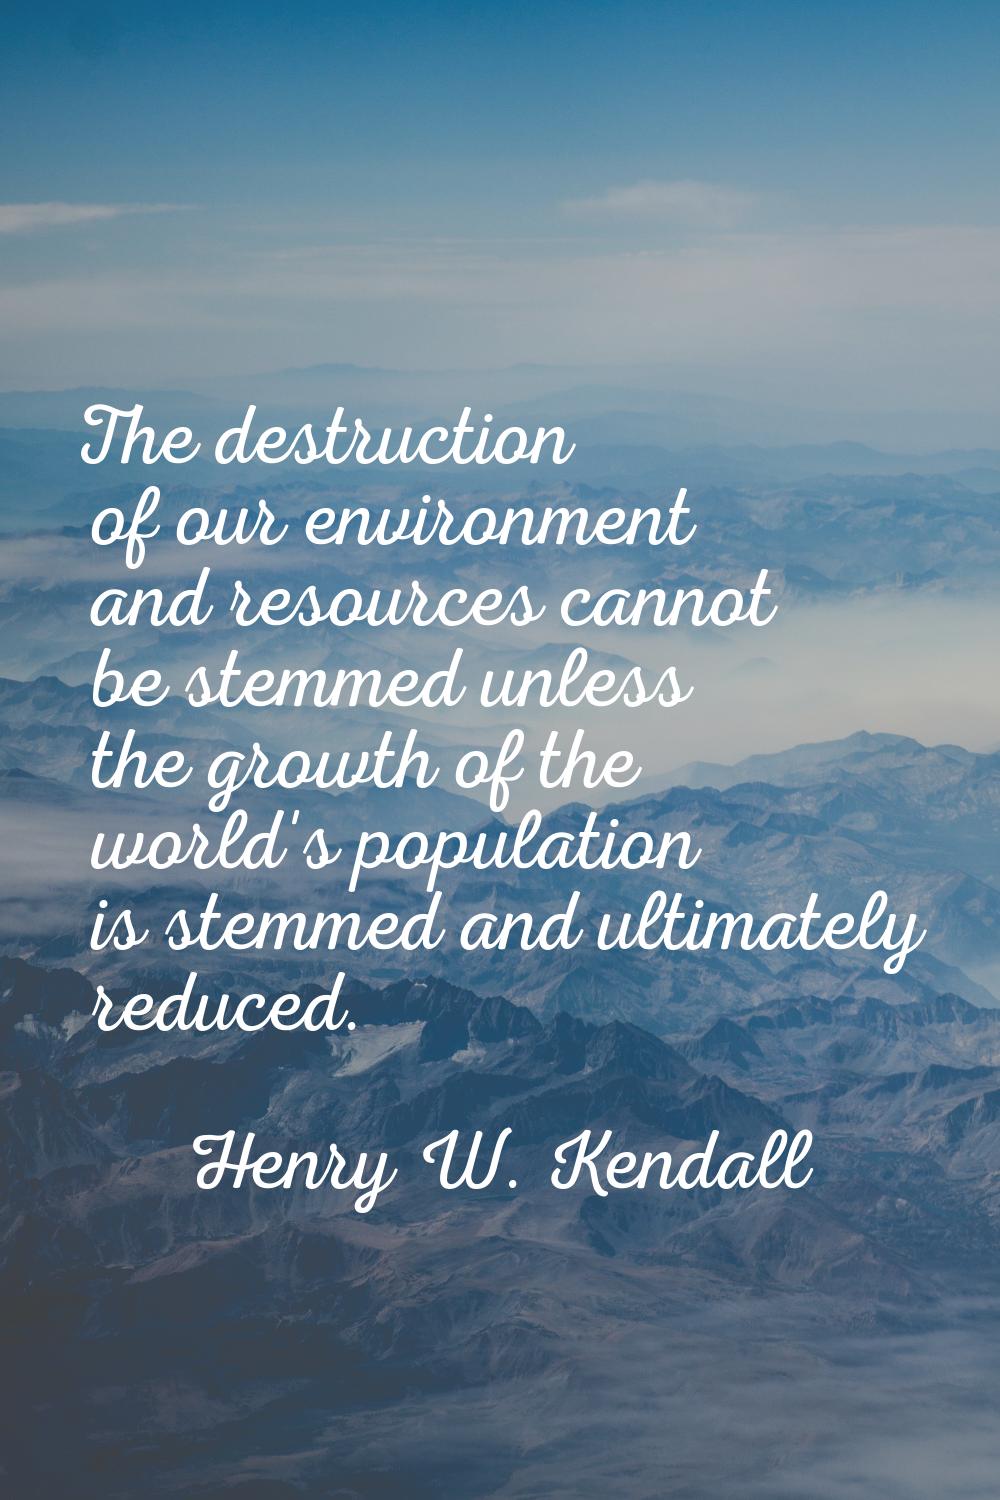 The destruction of our environment and resources cannot be stemmed unless the growth of the world's